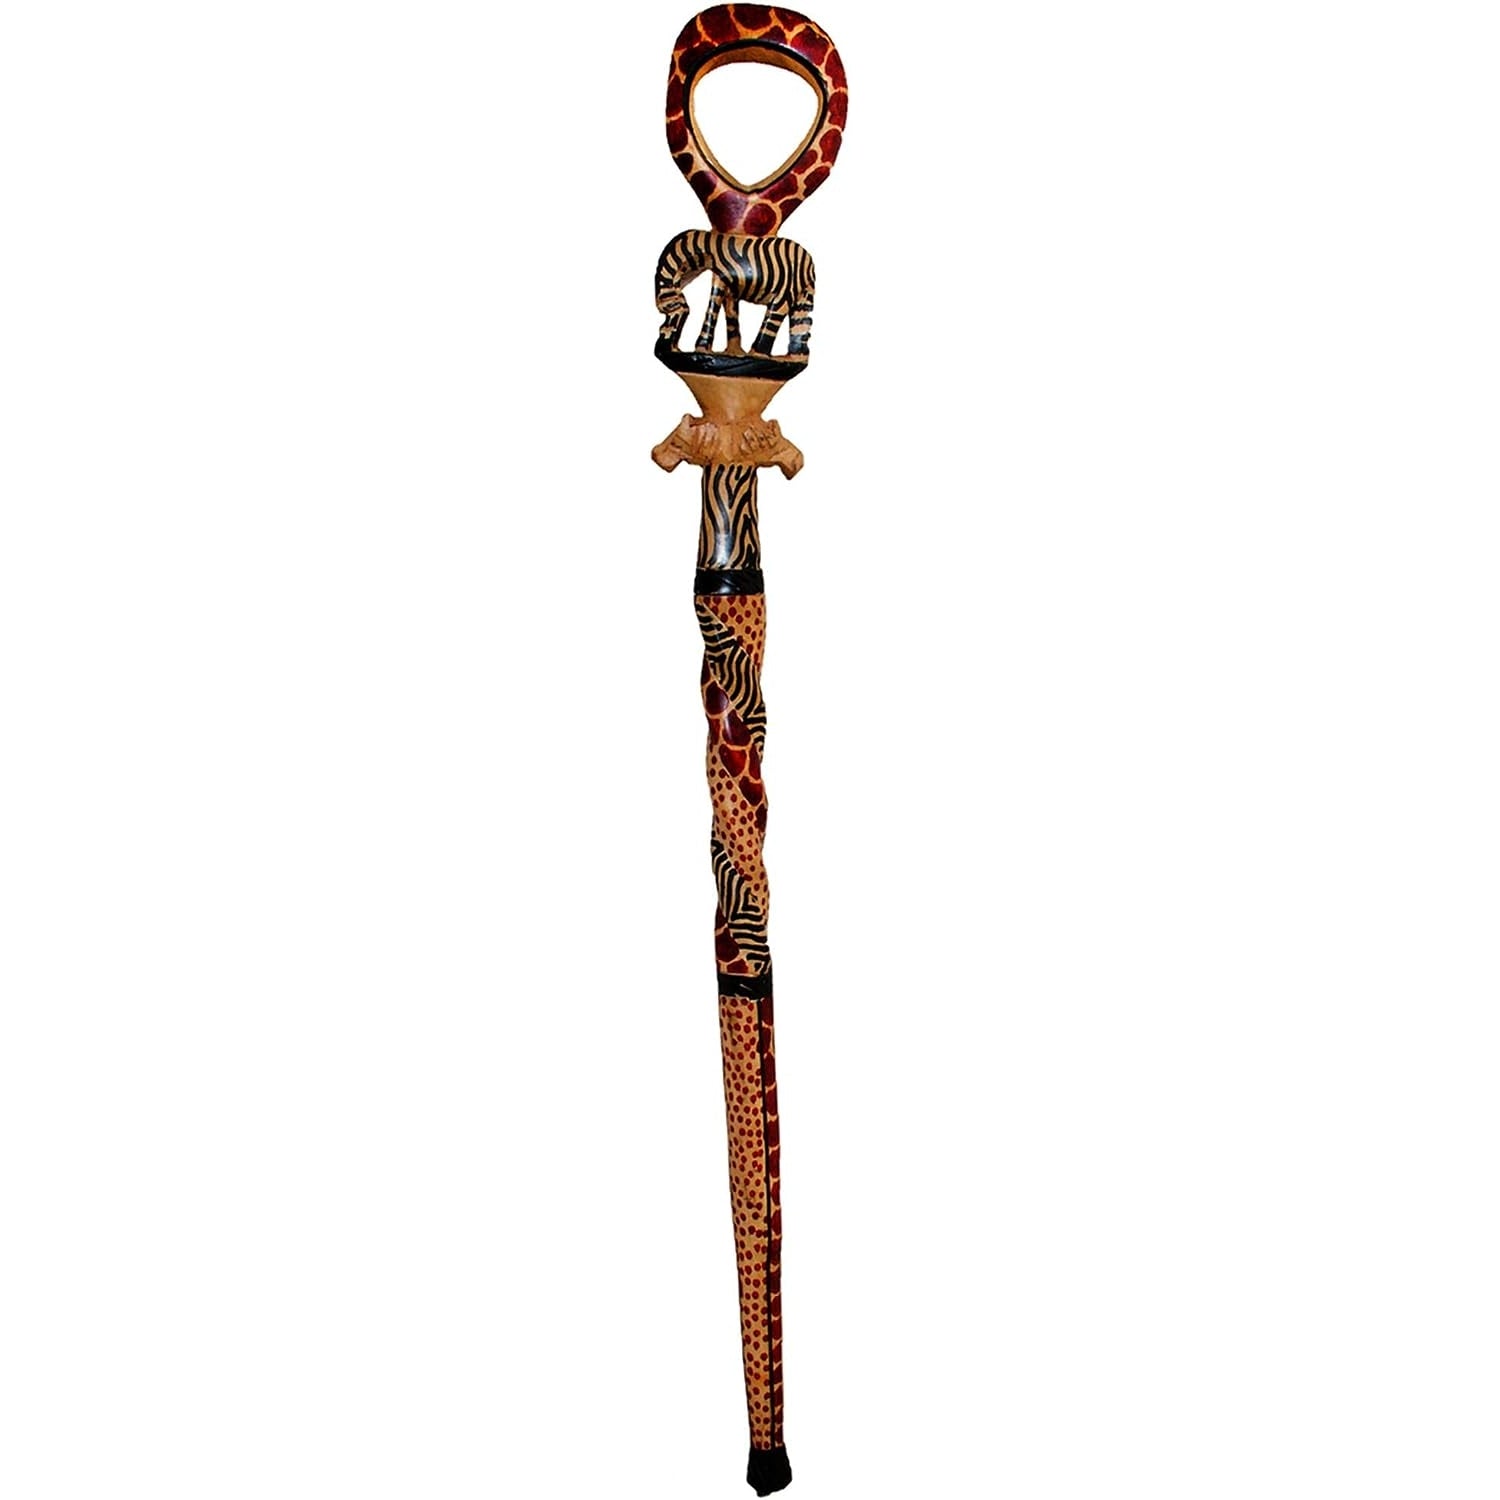 2 of 3: Authentic African Hand Made Wood Zebra and Lion Decorative Walking Stick/Cane